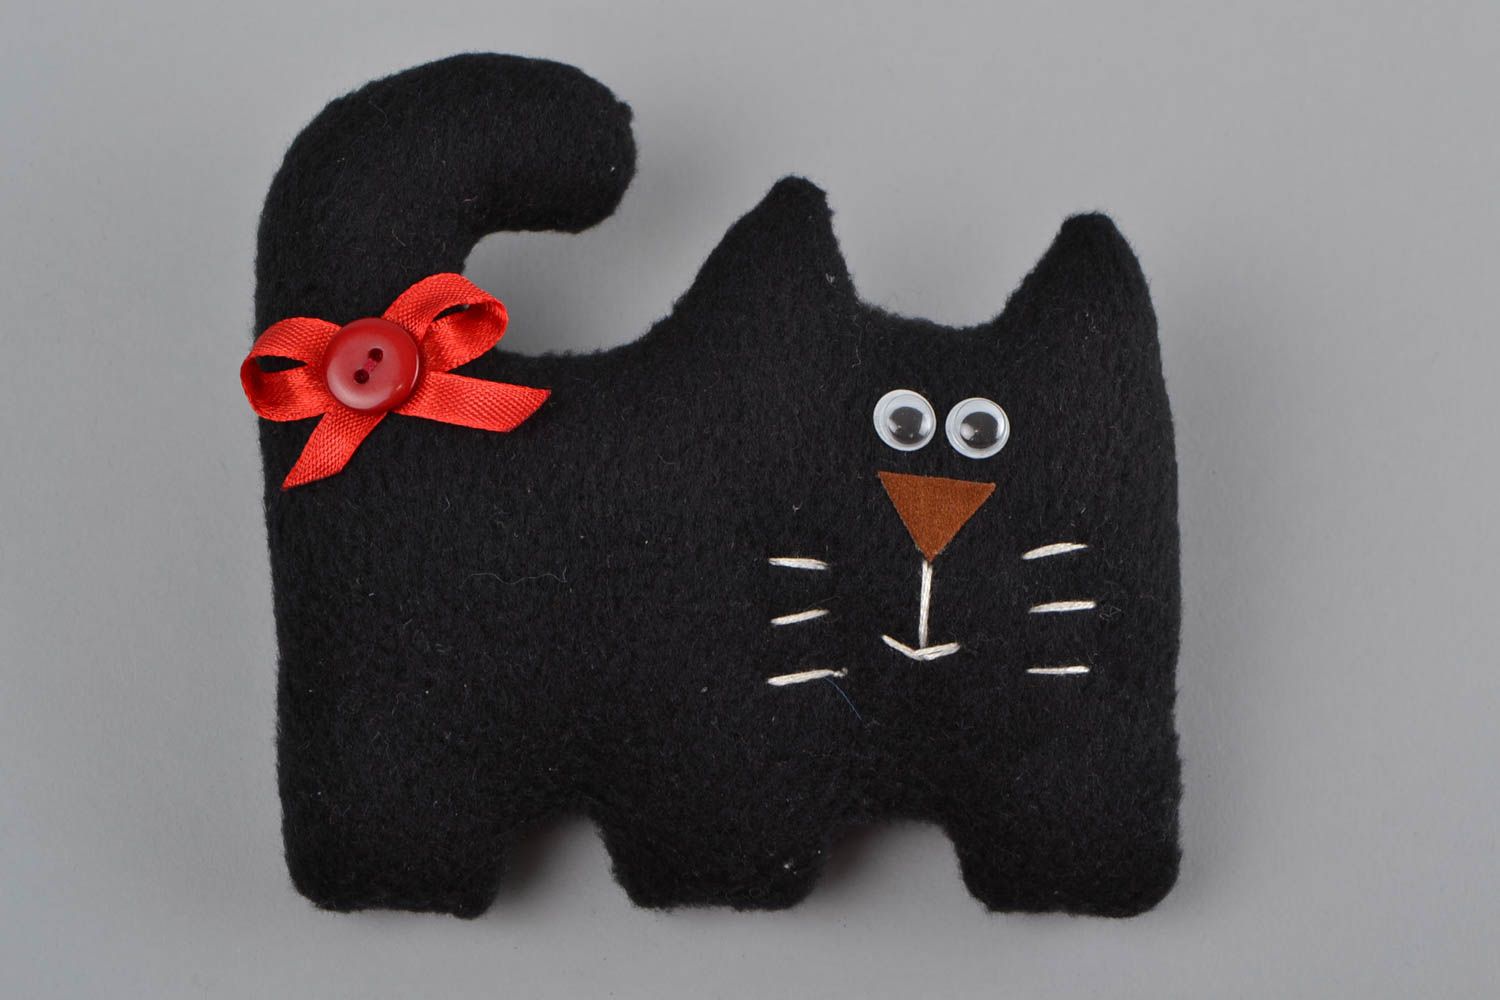 Handmade small soft toy sewn of black fleece in the shape of cat with red bow photo 3